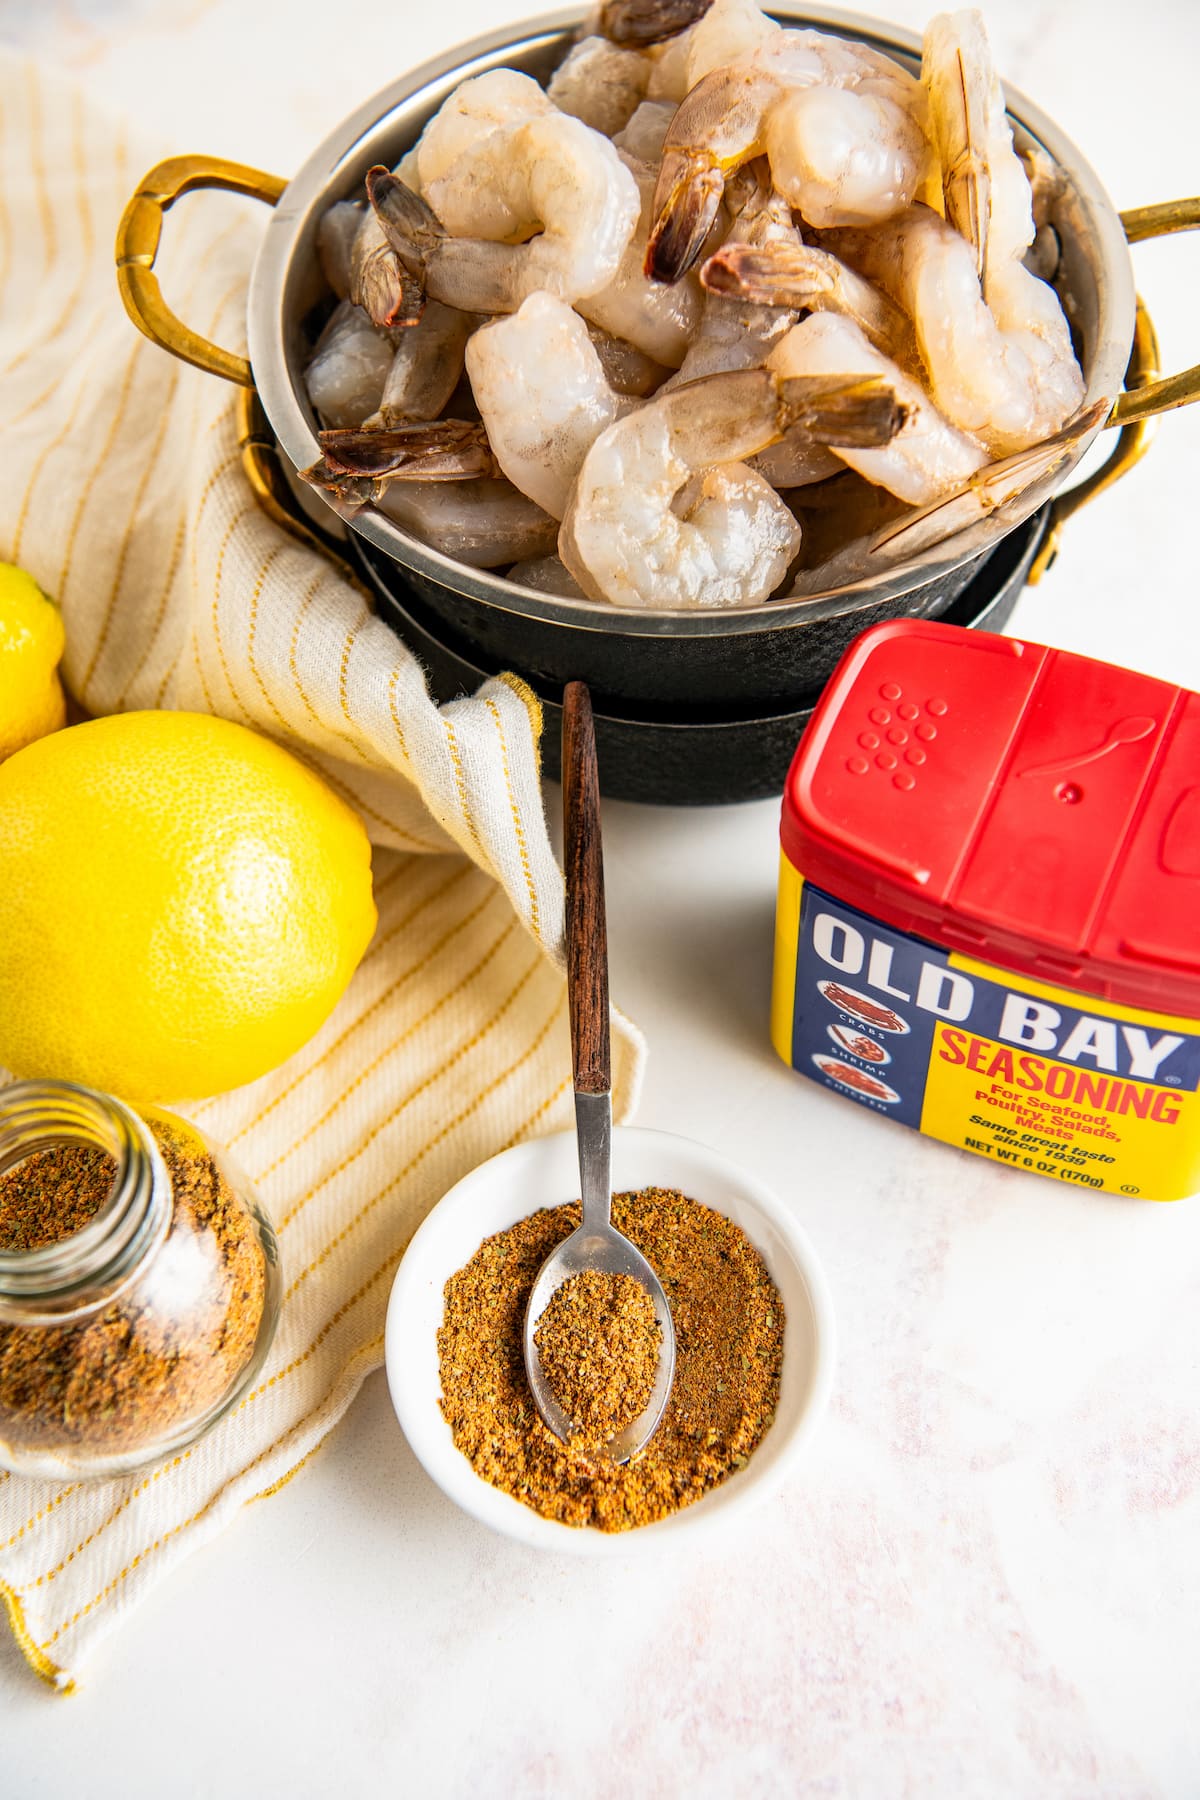 What is in Old Bay seasoning, and recipe to make your own blend